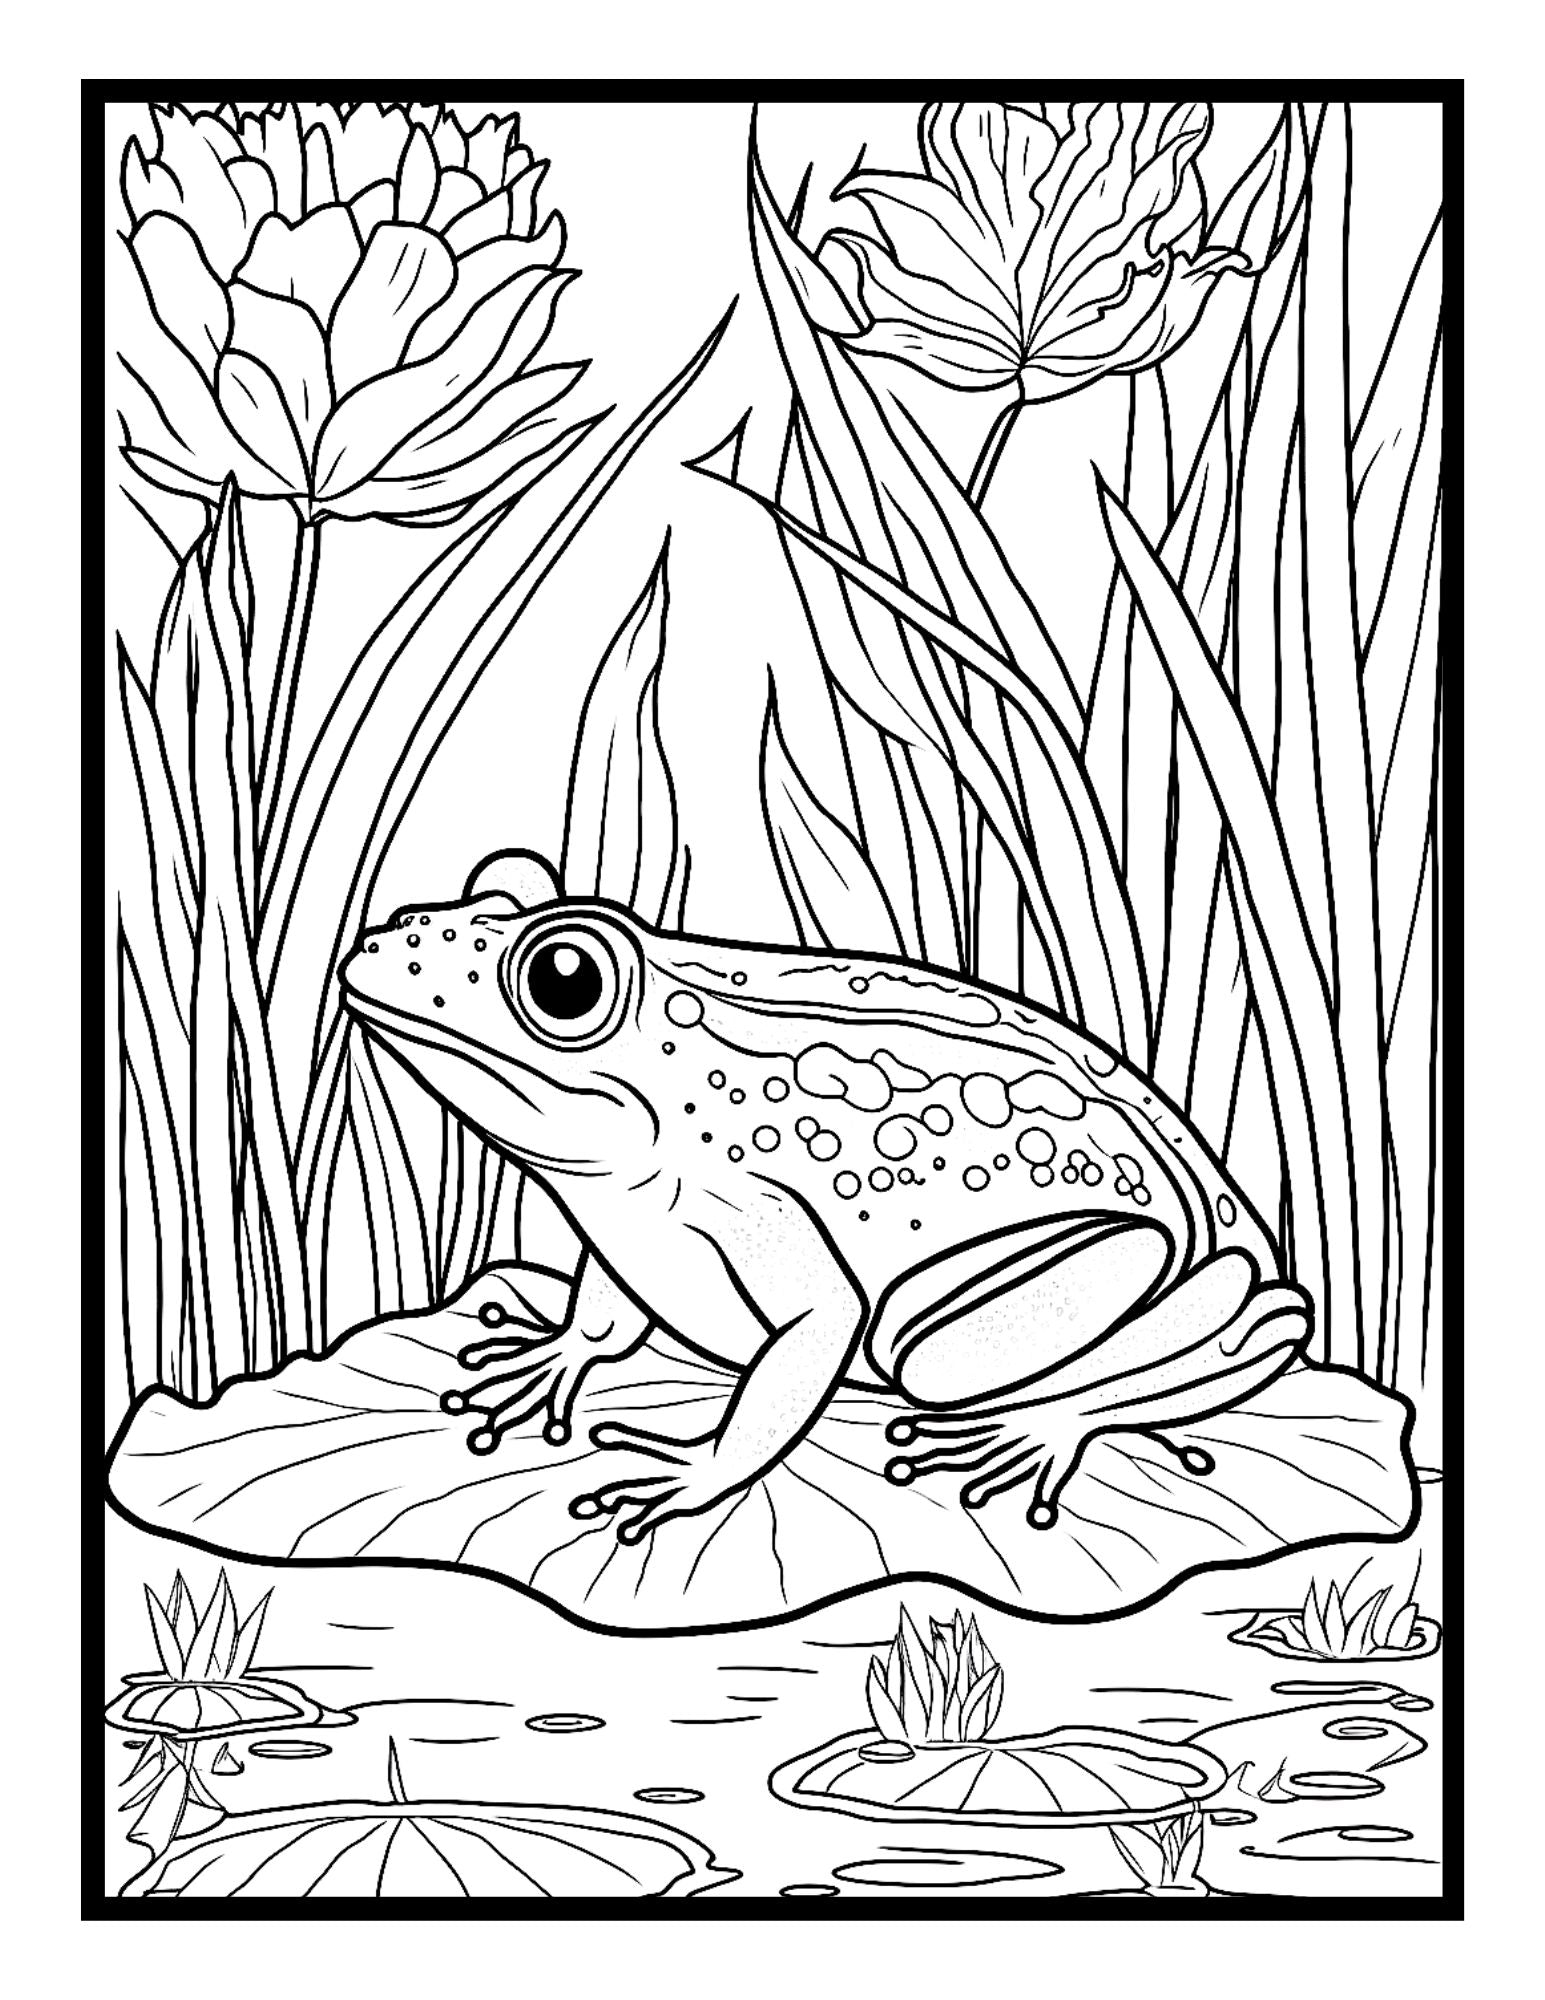 Cute Toad Coloring Book Frog Coloring Book For Adult And Kids Animal H –  Mode Art Design